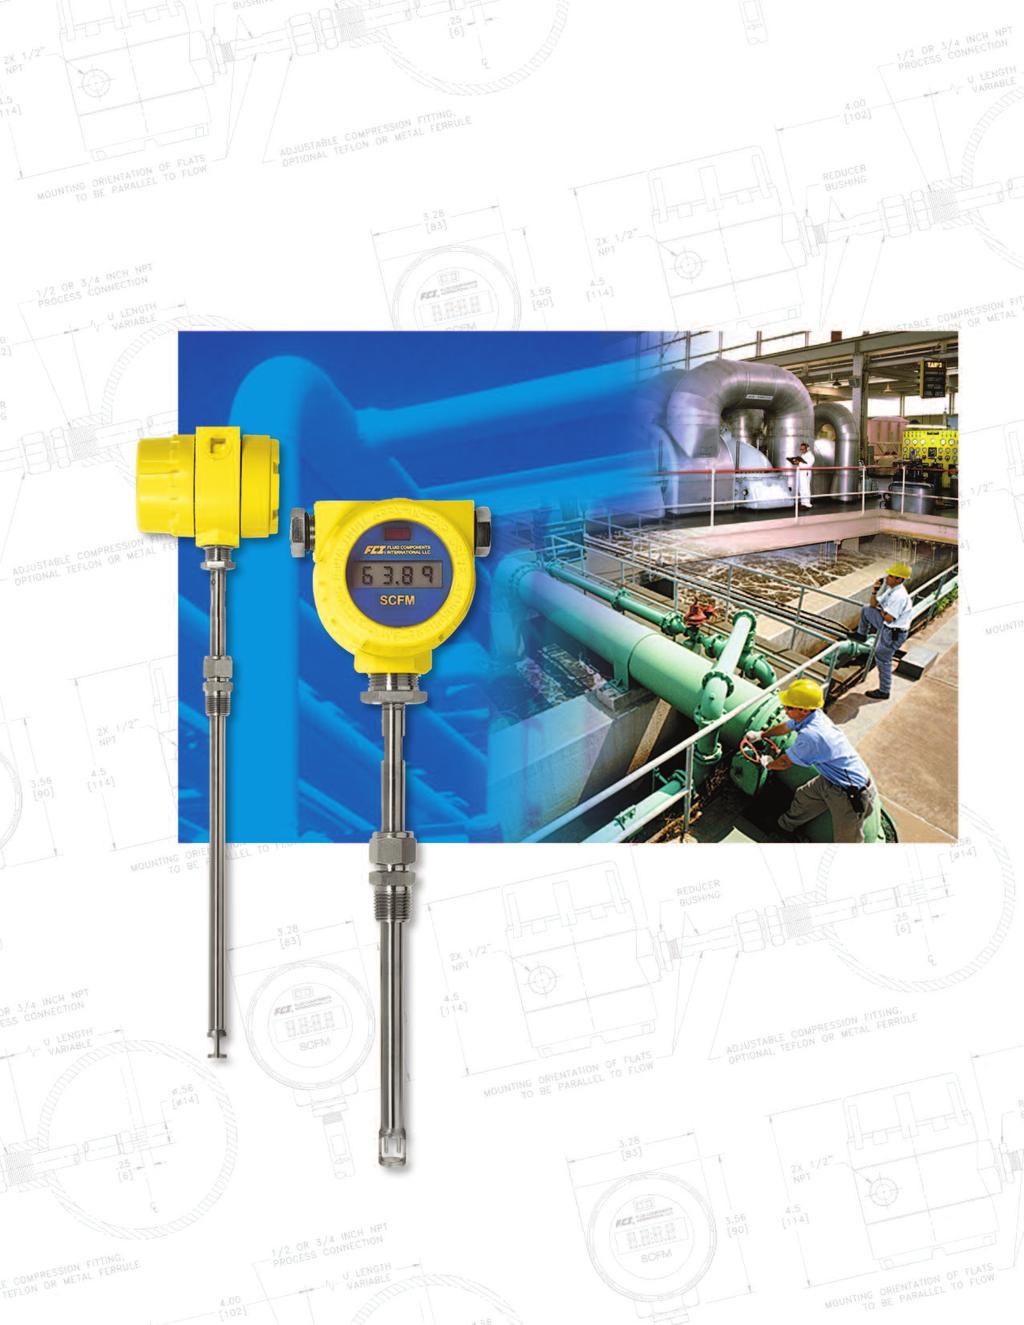 FCI ST50 Series Flow Meters Low Cost, Low Maintenance Air, Compressed Air and Nitrogen Flow Measurement for Process and Plant Applications FCI ST50 FLOW METER Wastewater Treatment